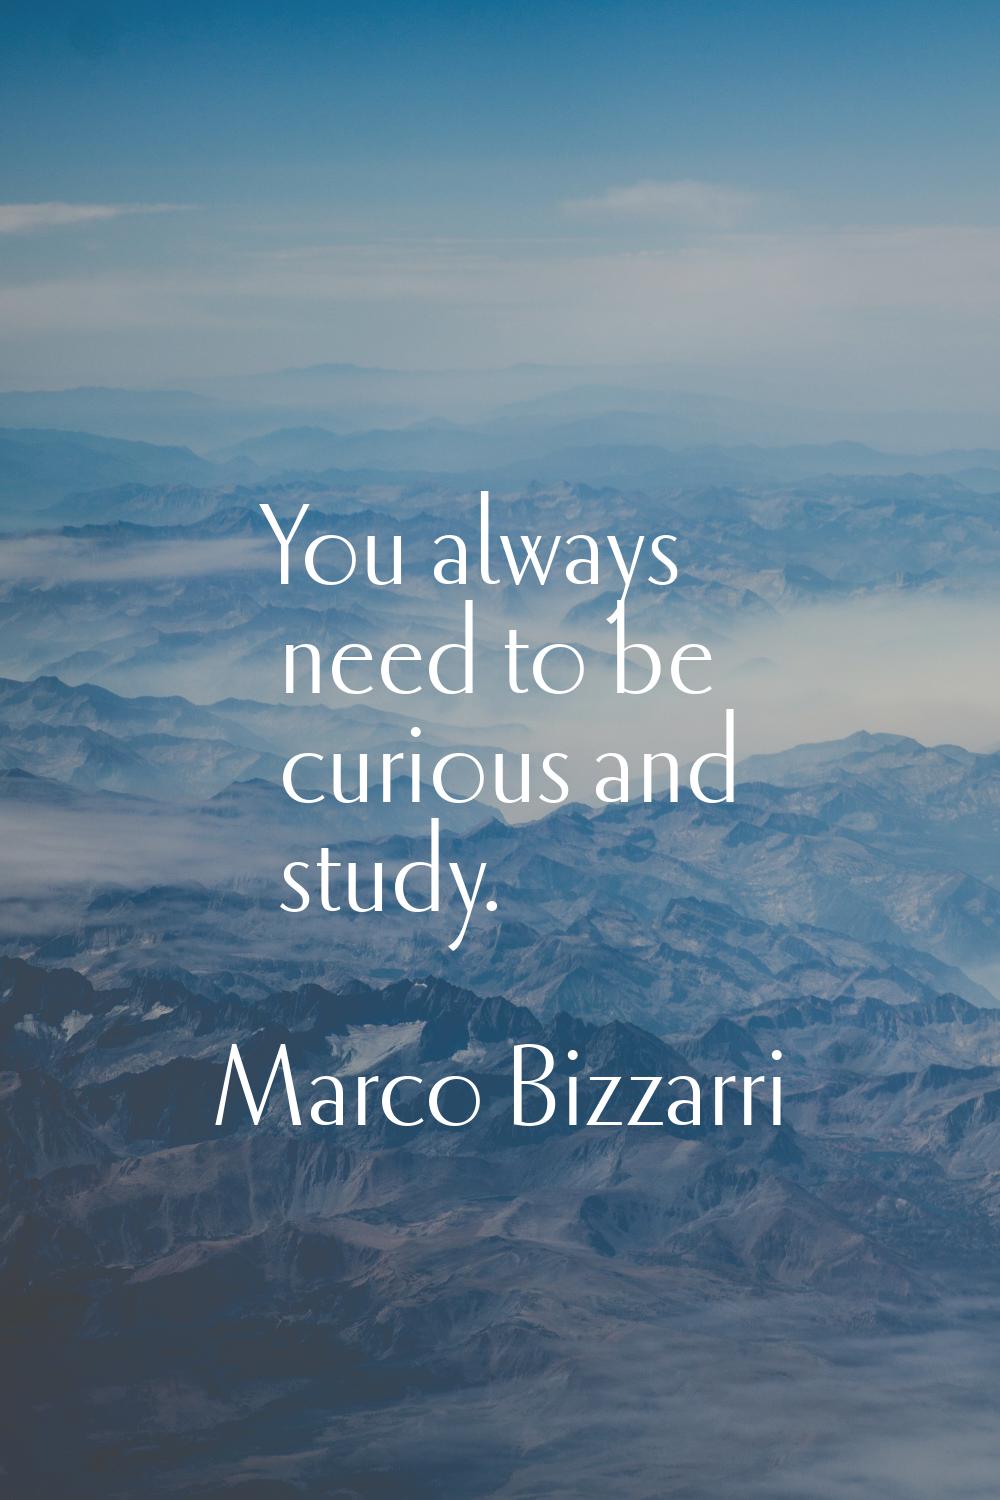 You always need to be curious and study.